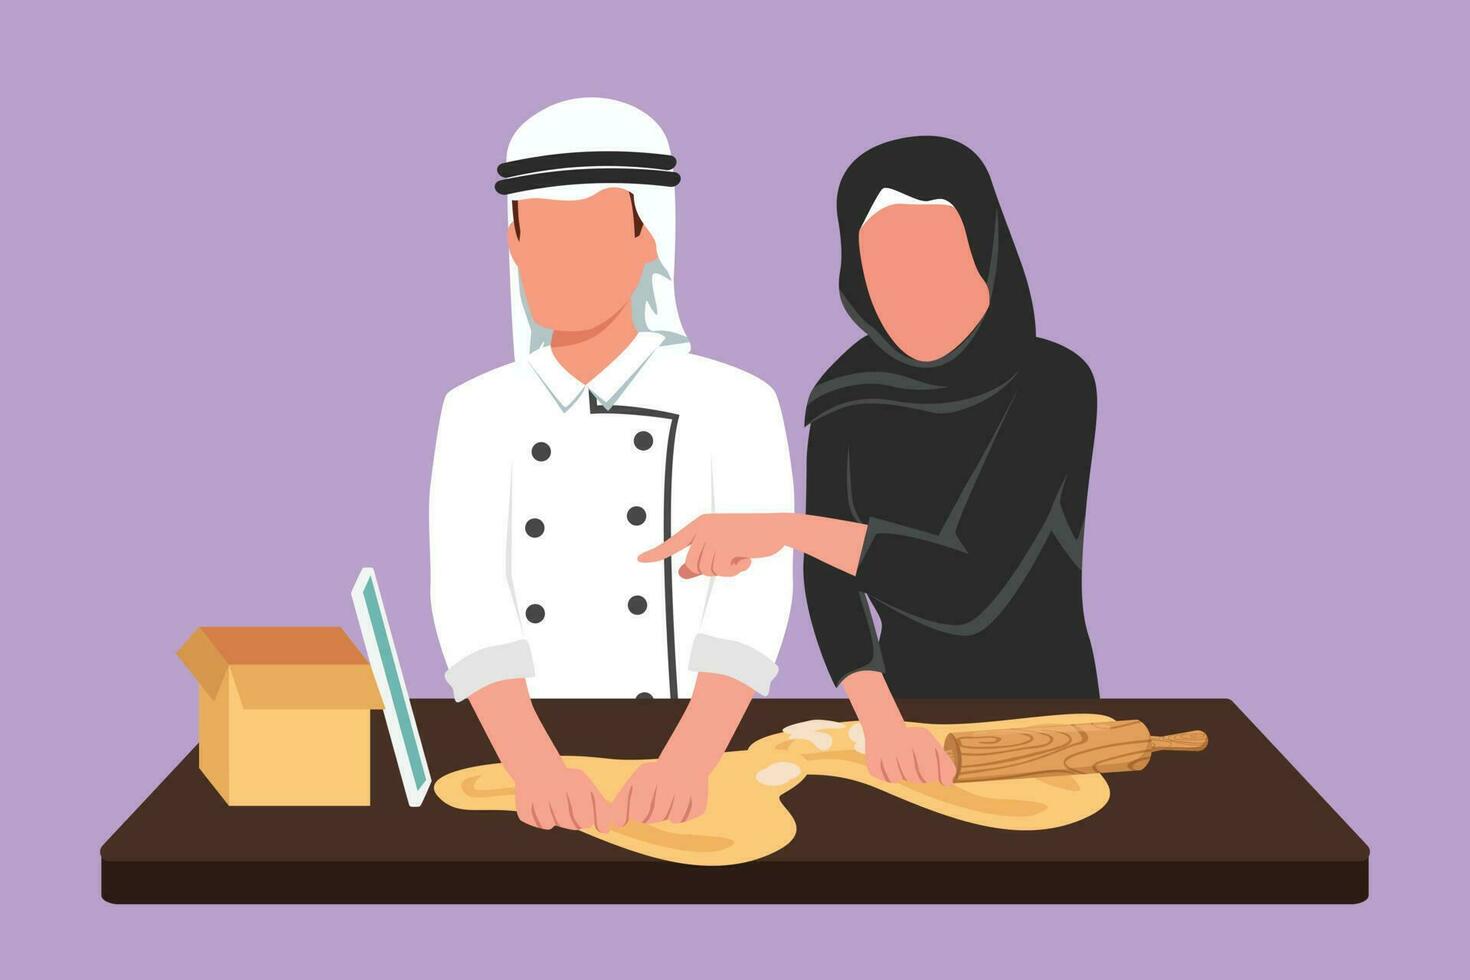 Cartoon flat style drawing romantic Arabian couple cooking together while watching tutorial from gadget tablet screen. Learn to cook with modern digital technology. Graphic design vector illustration